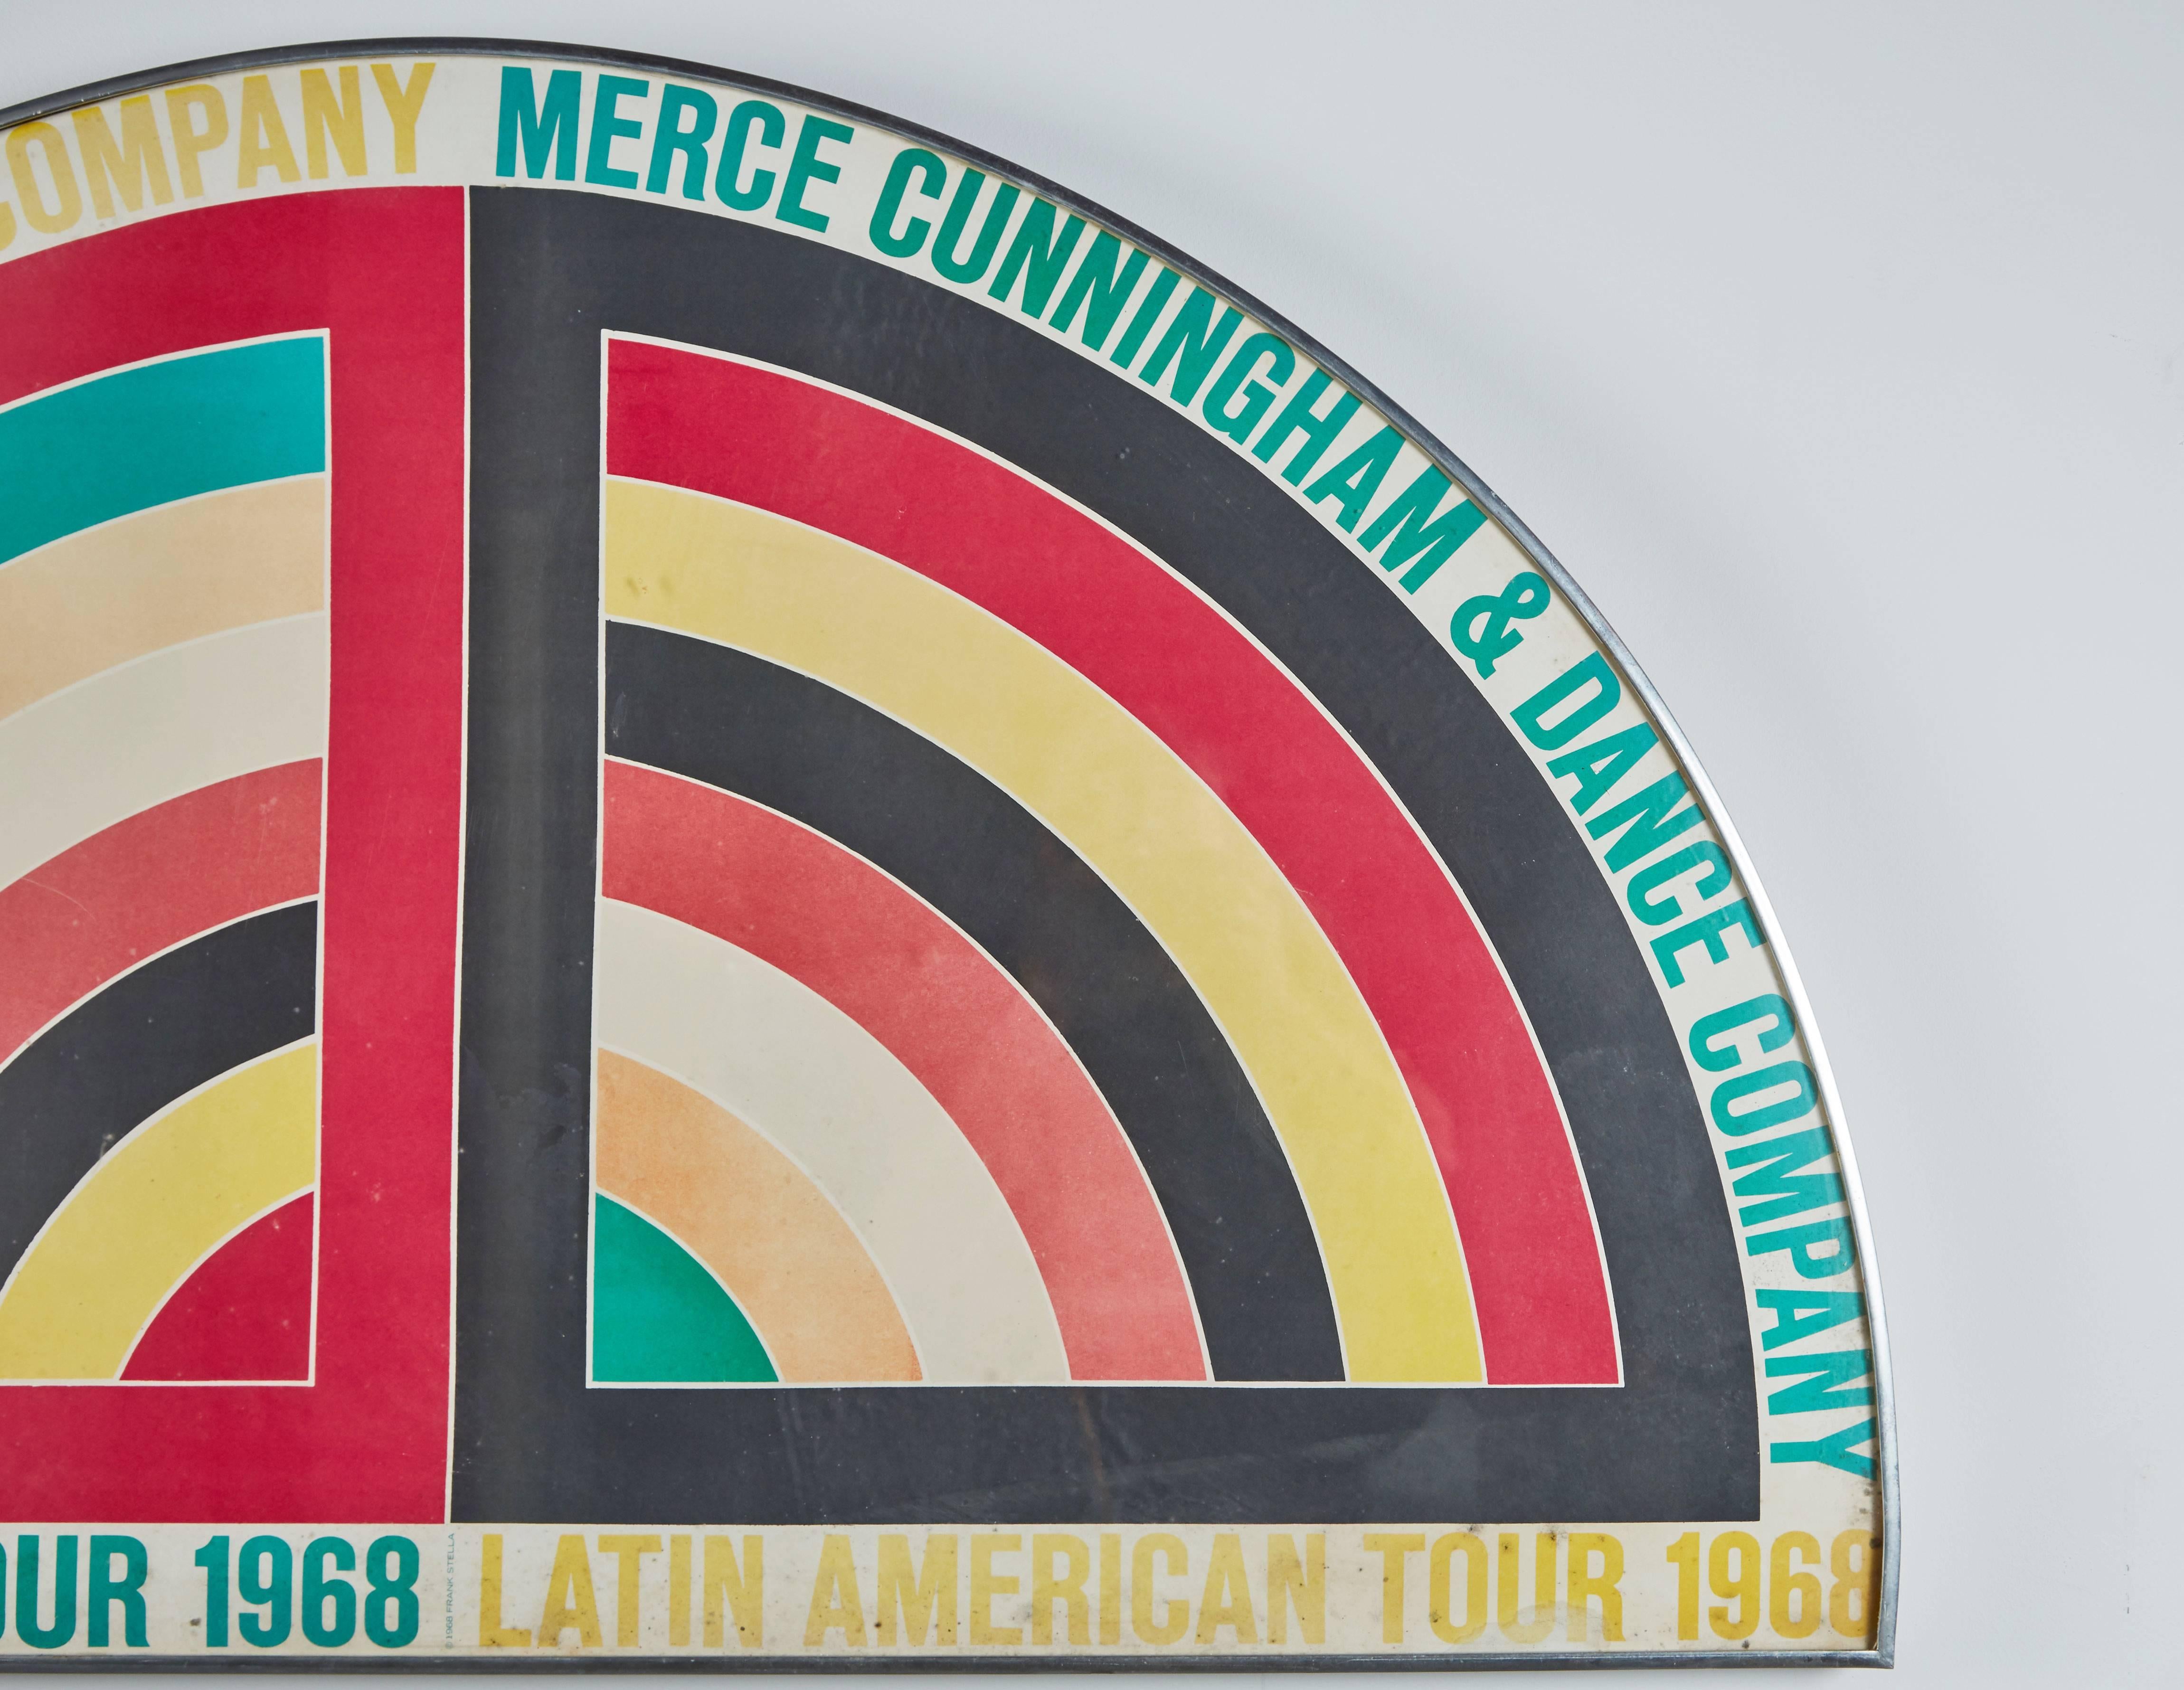 Original exhibition poster for the Merce Cunningham Dance Co. Latin American tour designed and created by Frank Stella. Framed half-moon shape with imagery based off of Stella's Protracter series. Made in USA, circa 1968.